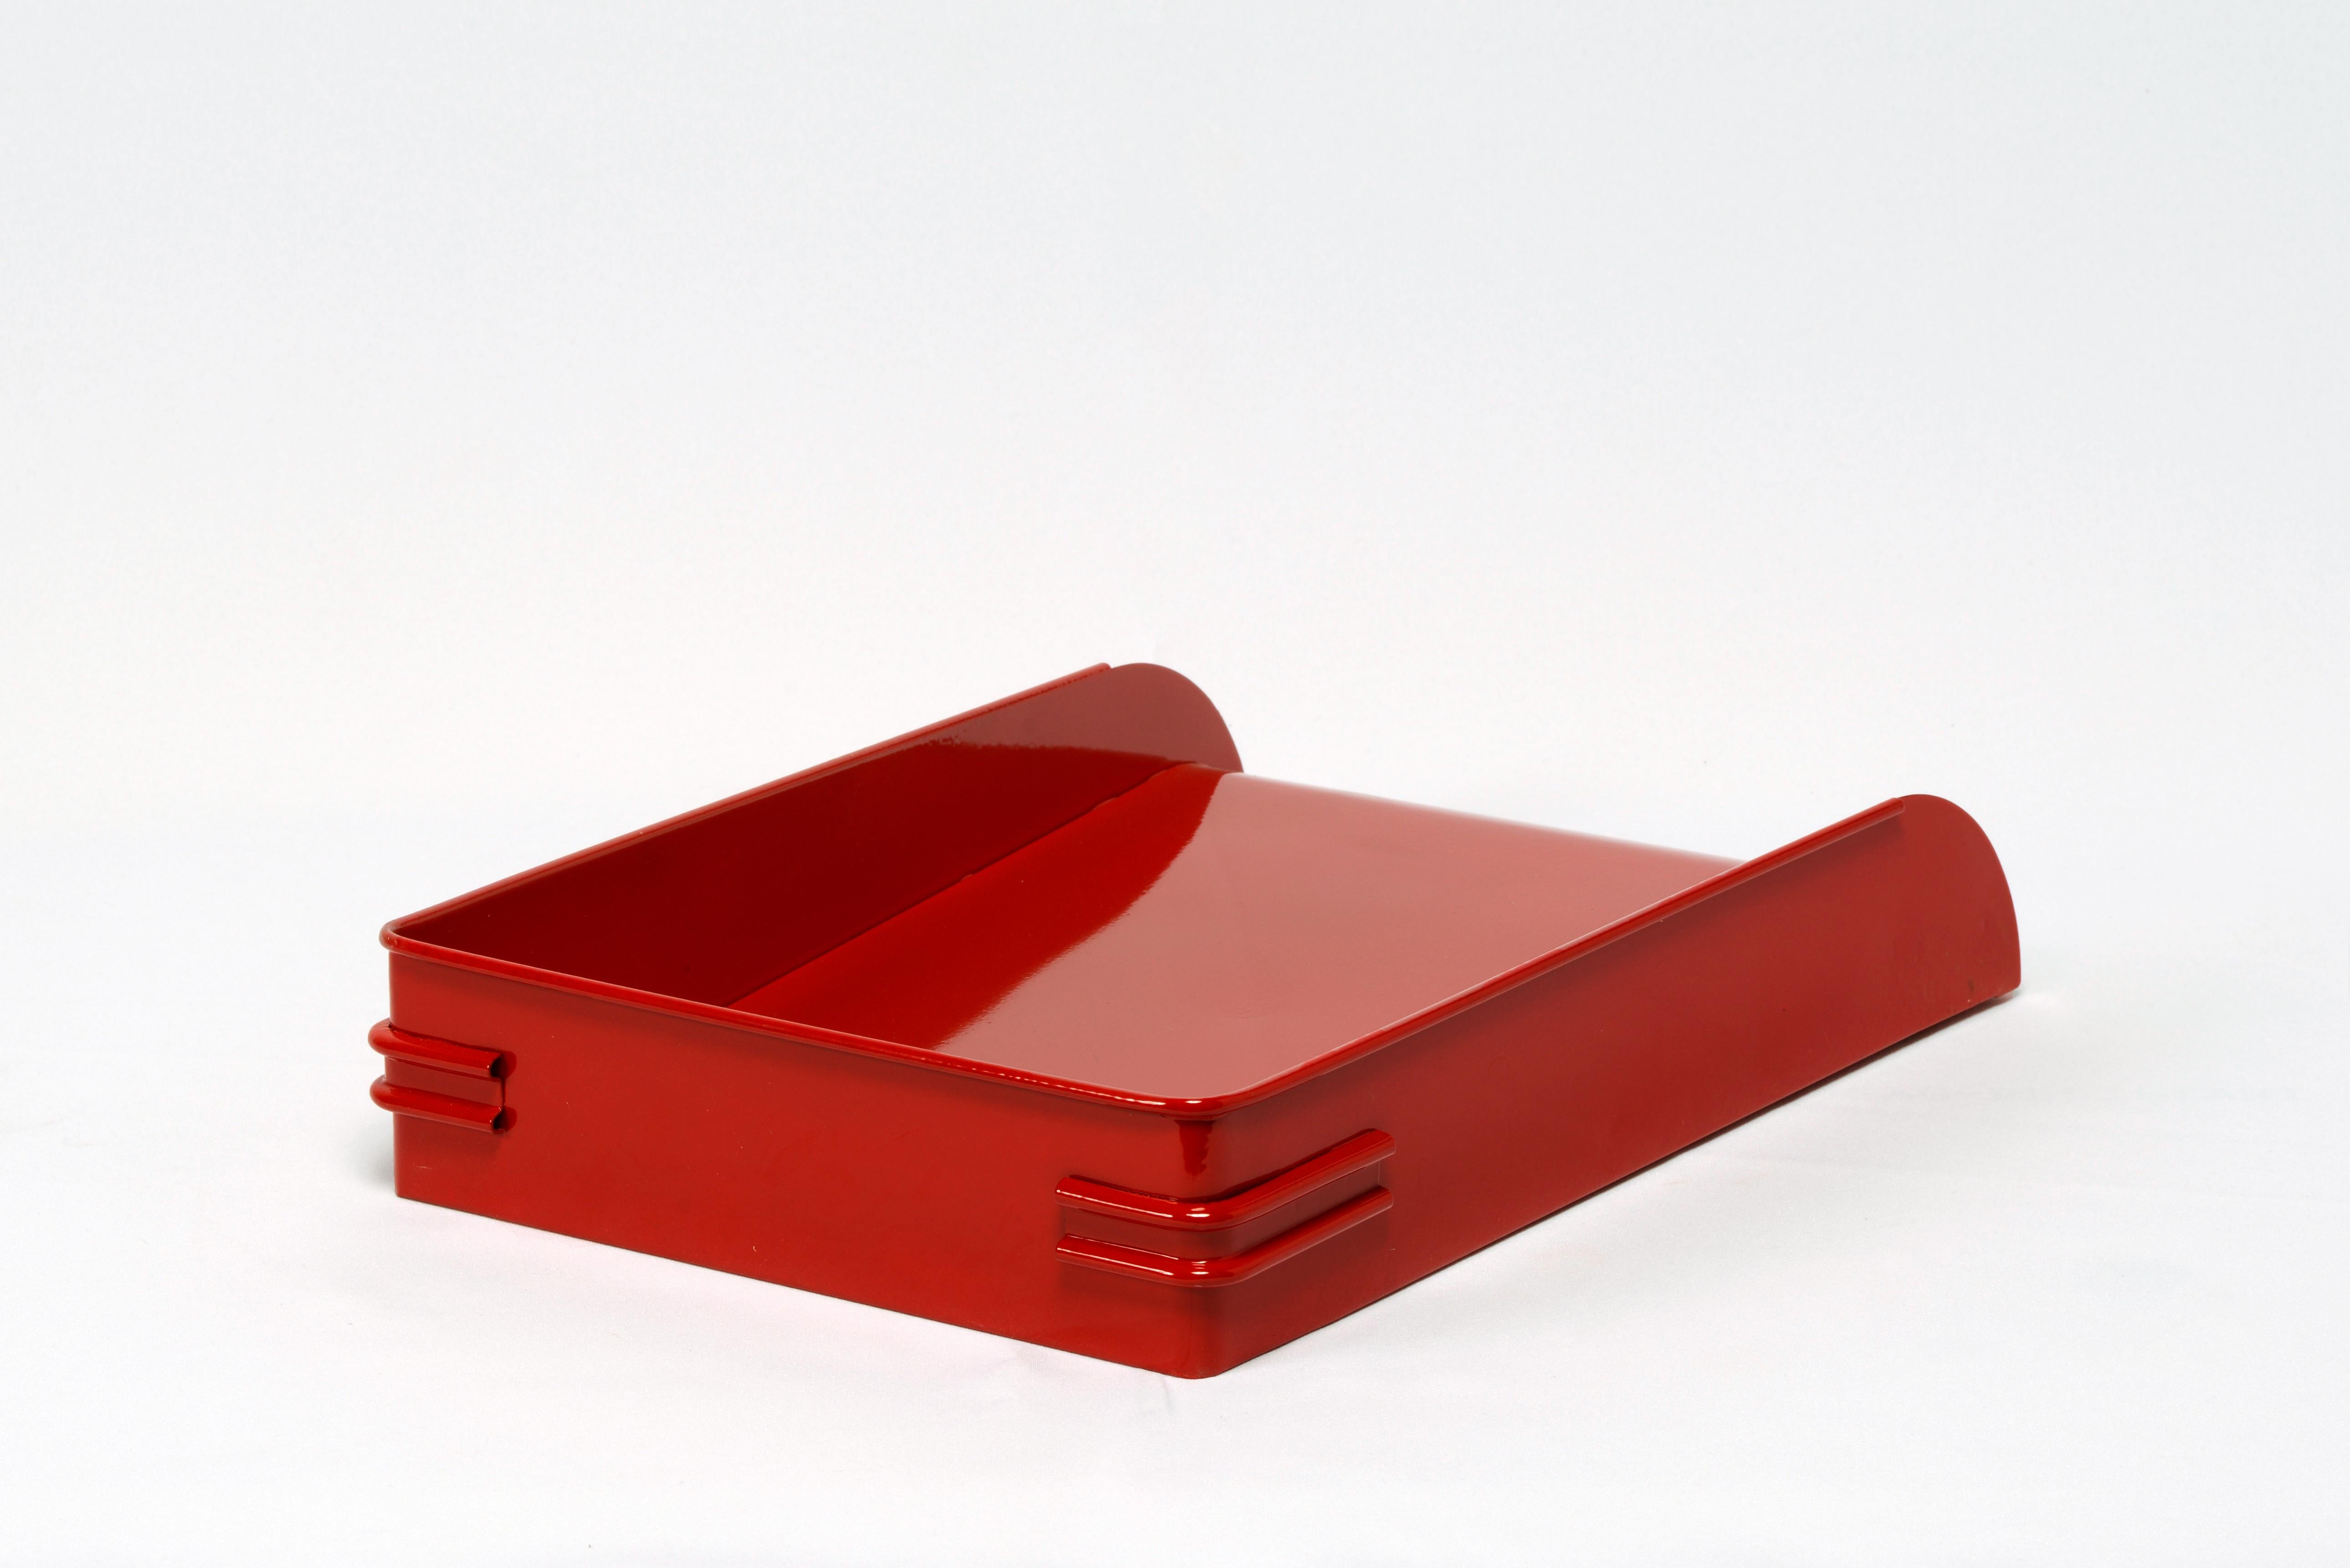 American 1930s Steel Letter Tray Refinished in Gloss Red